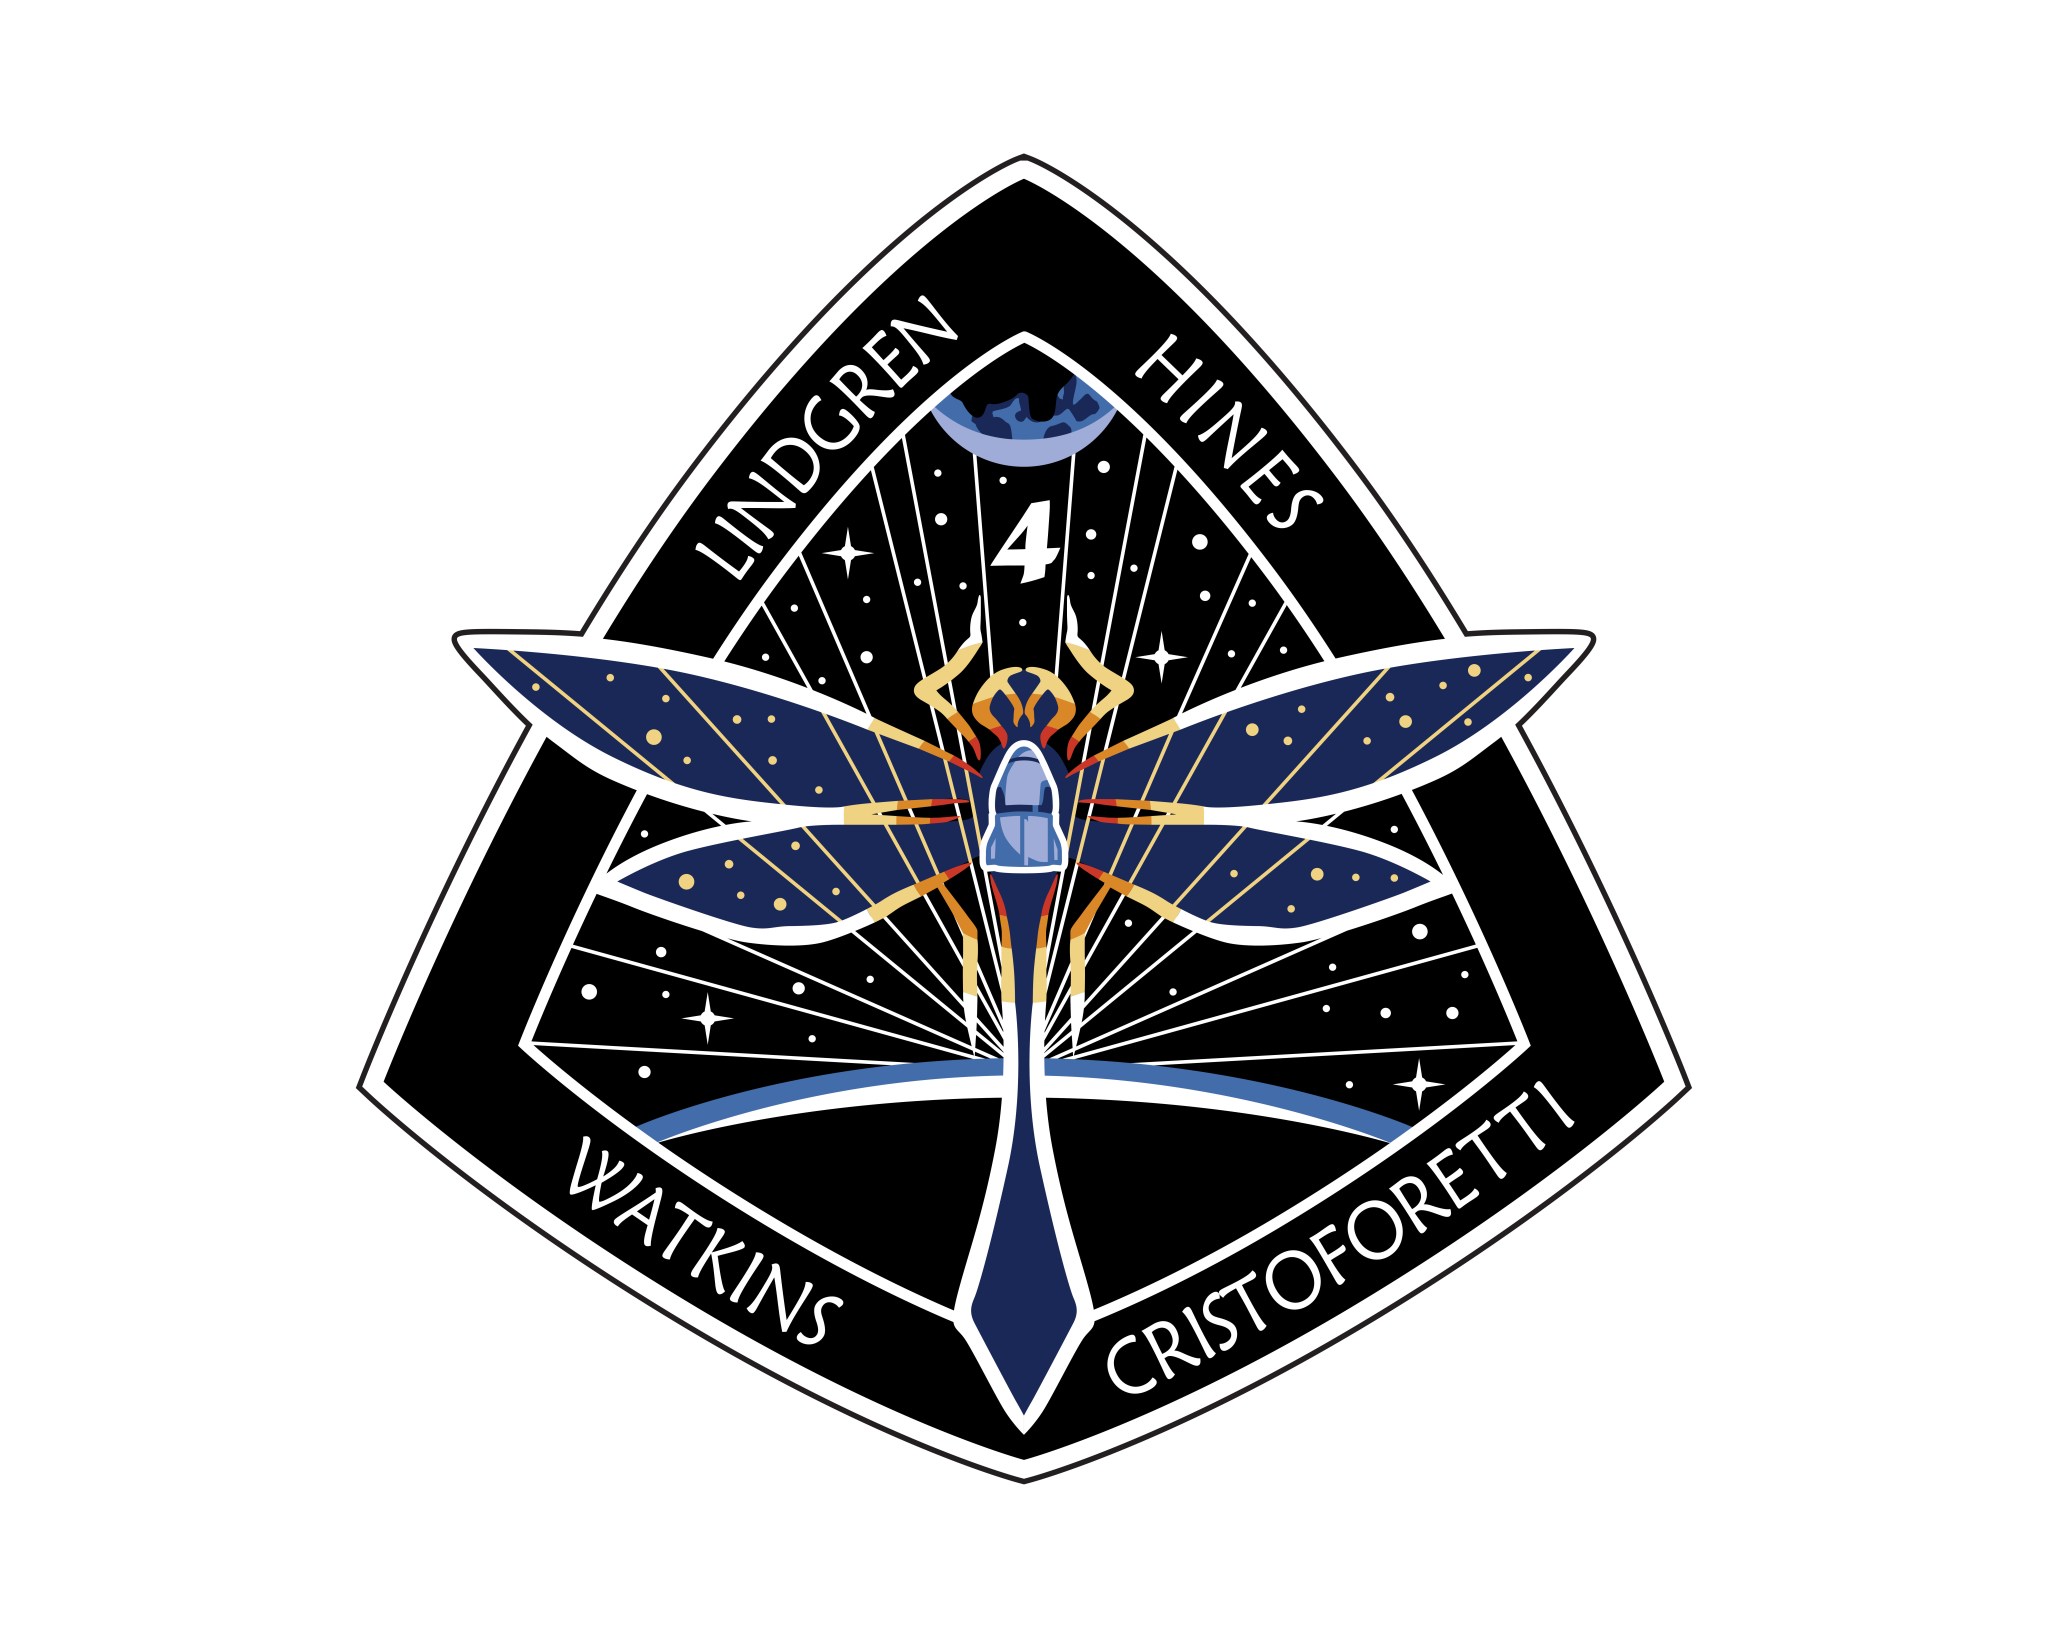 The mission patch for NASA's SpaceX Crew-4 launch.